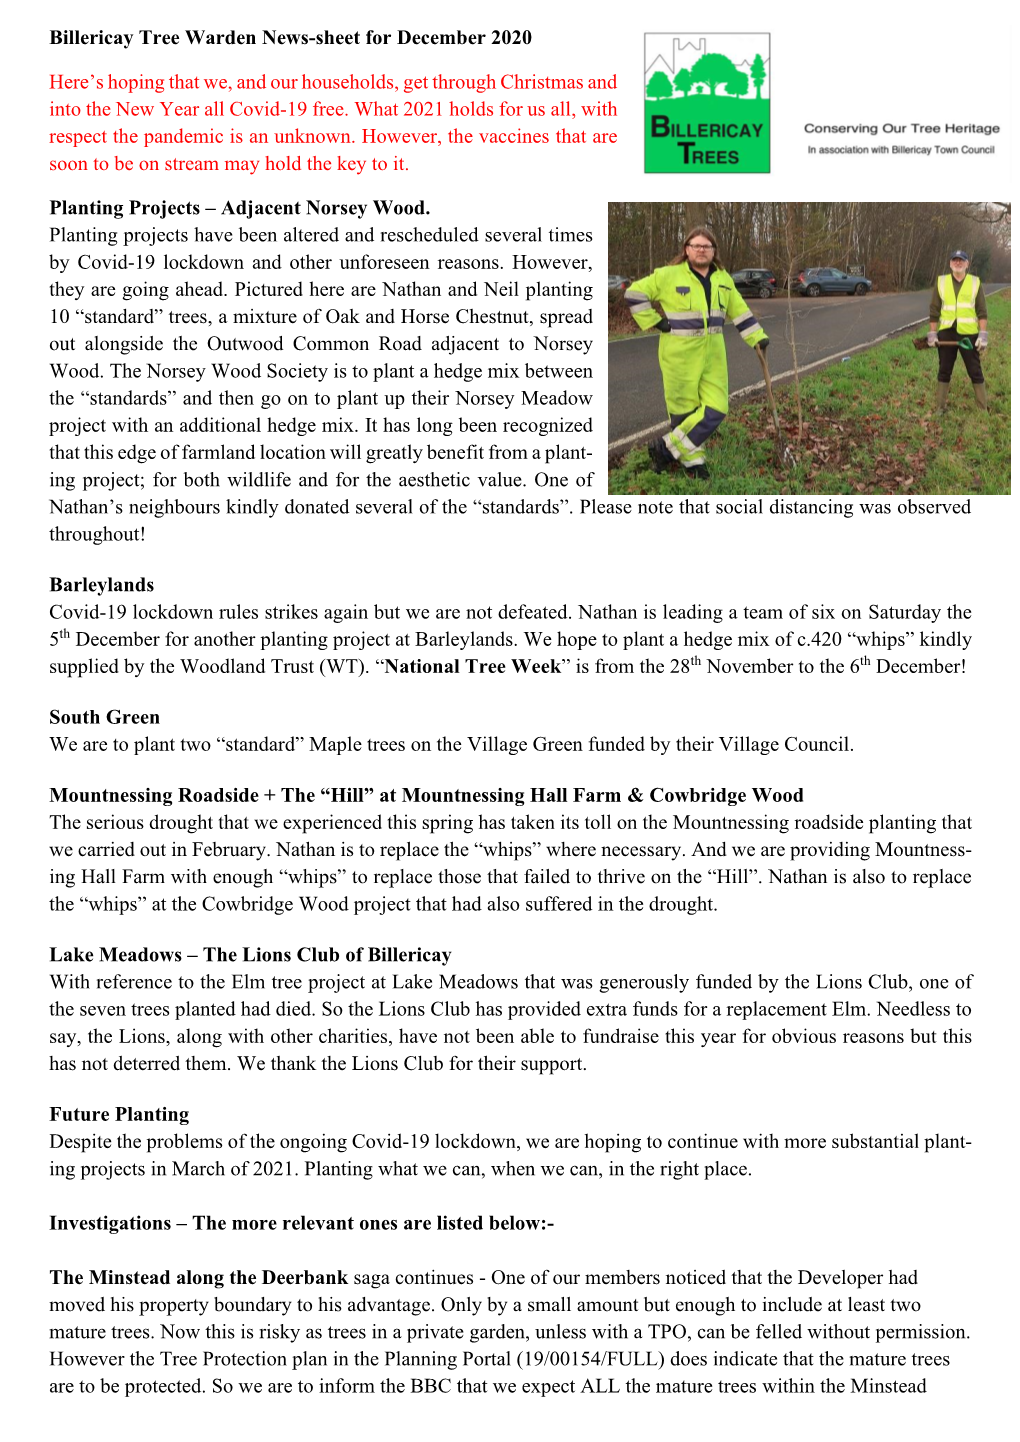 Billericay Tree Warden News-Sheet for December 2020 Here's Hoping That